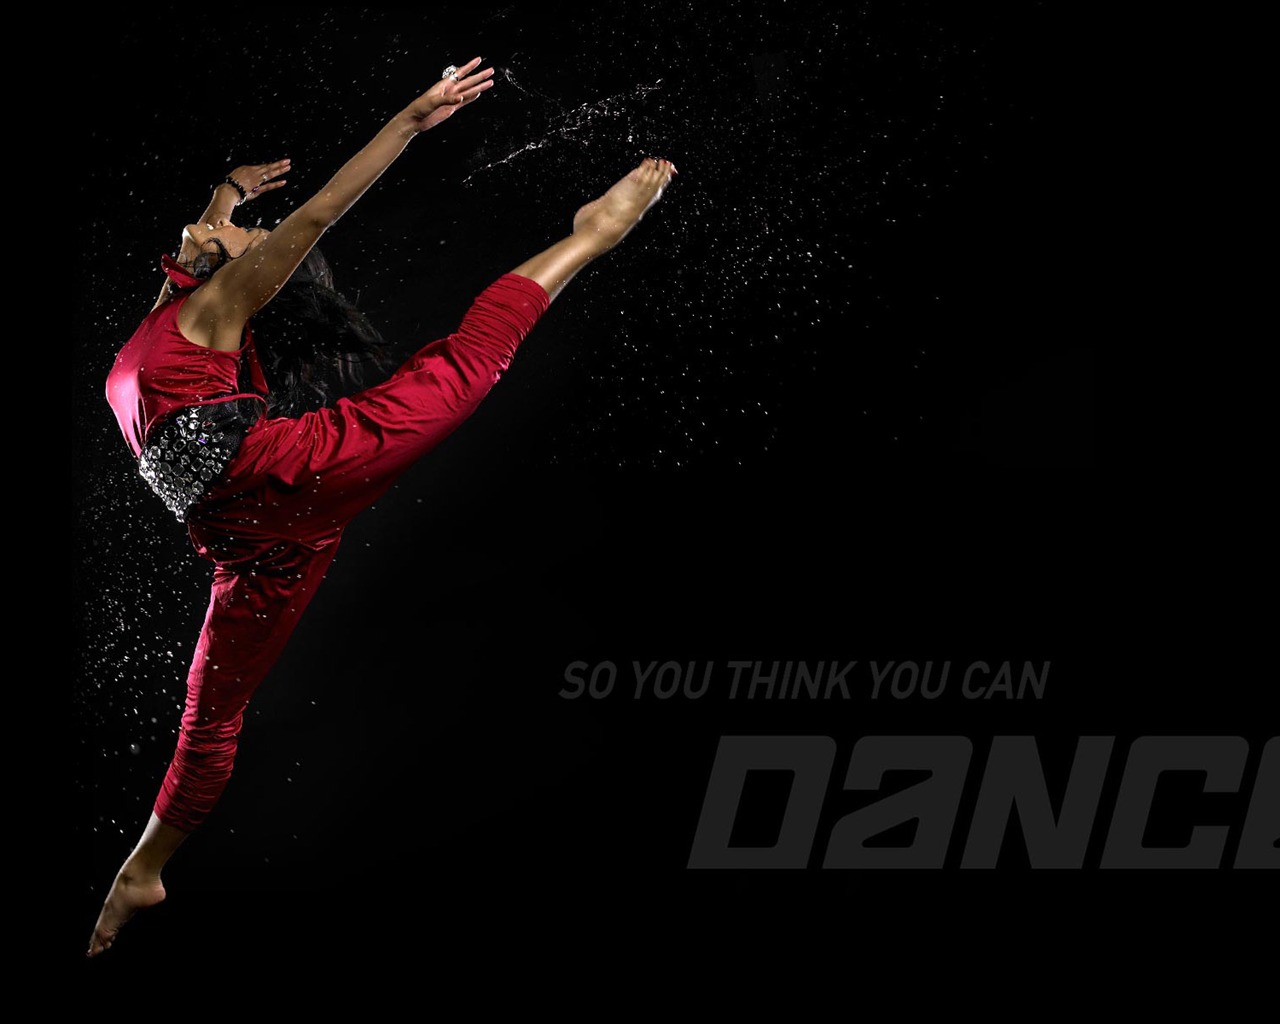 So You Think You Can Dance Wallpaper (1) #9 - 1280x1024